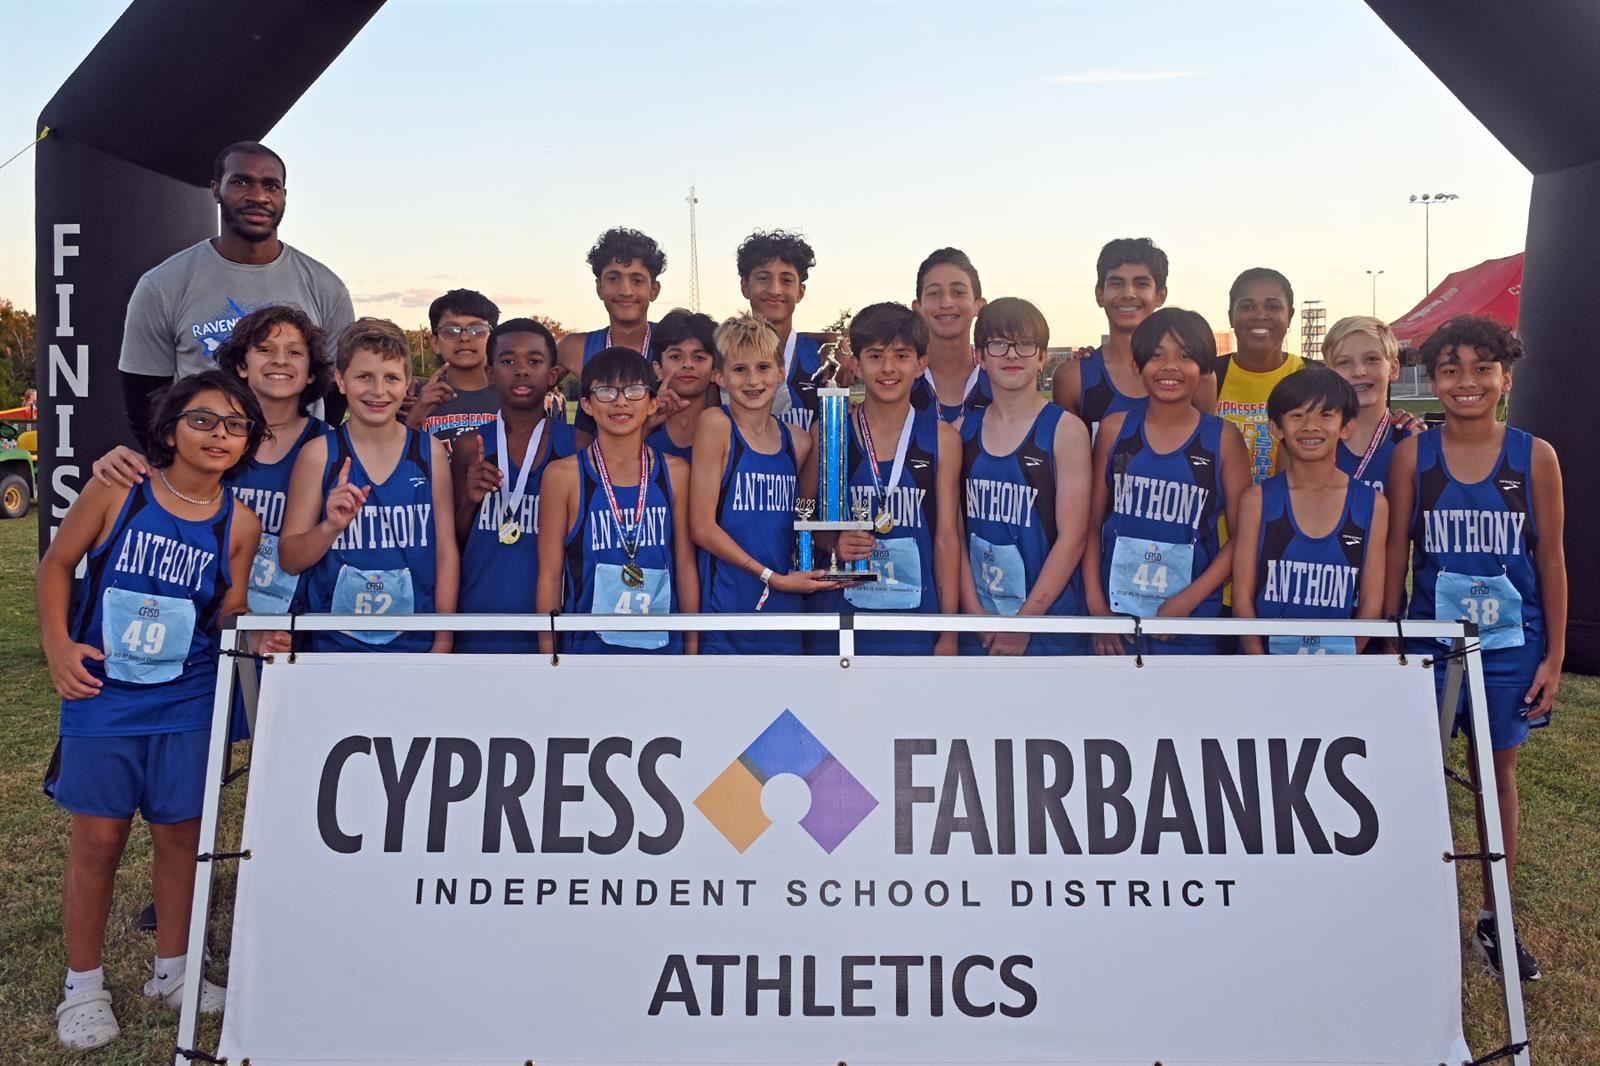 Anthony Middle School won the seventh grade boys’ cross country team title with 19 points on Oct. 18 at Cypress Woods.